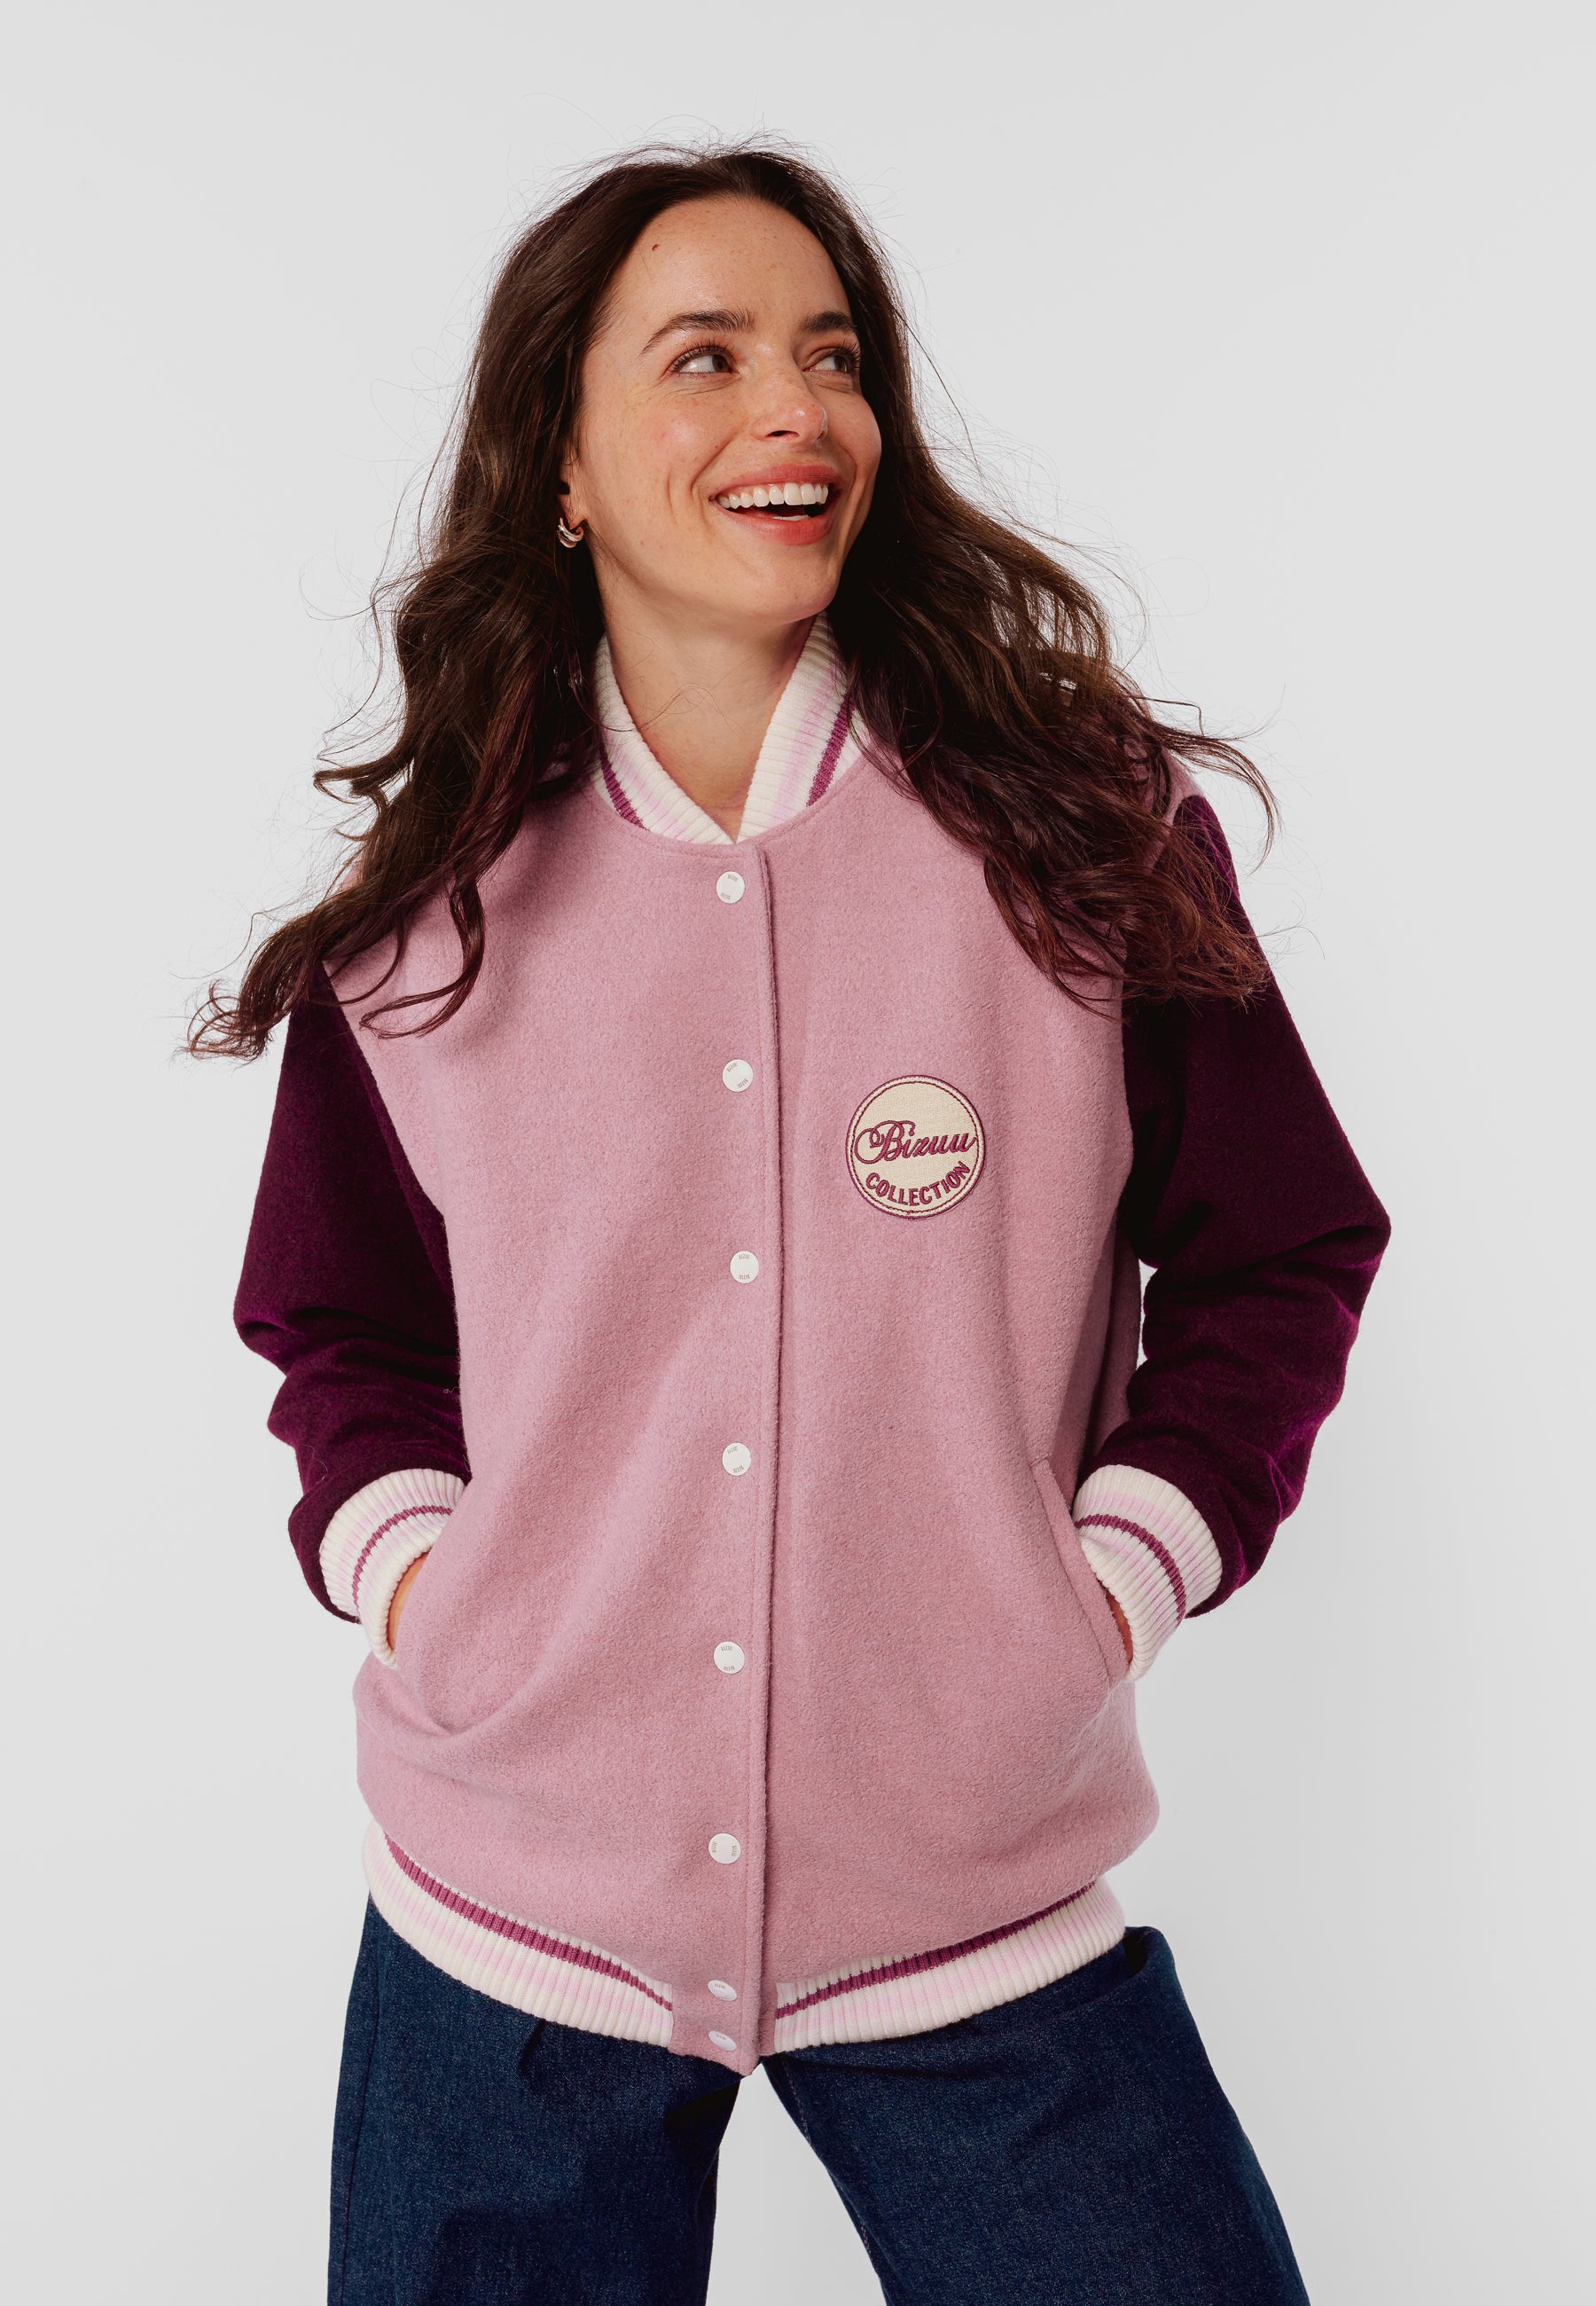 BASSIA pink bomber jacket with a logo patch on the back